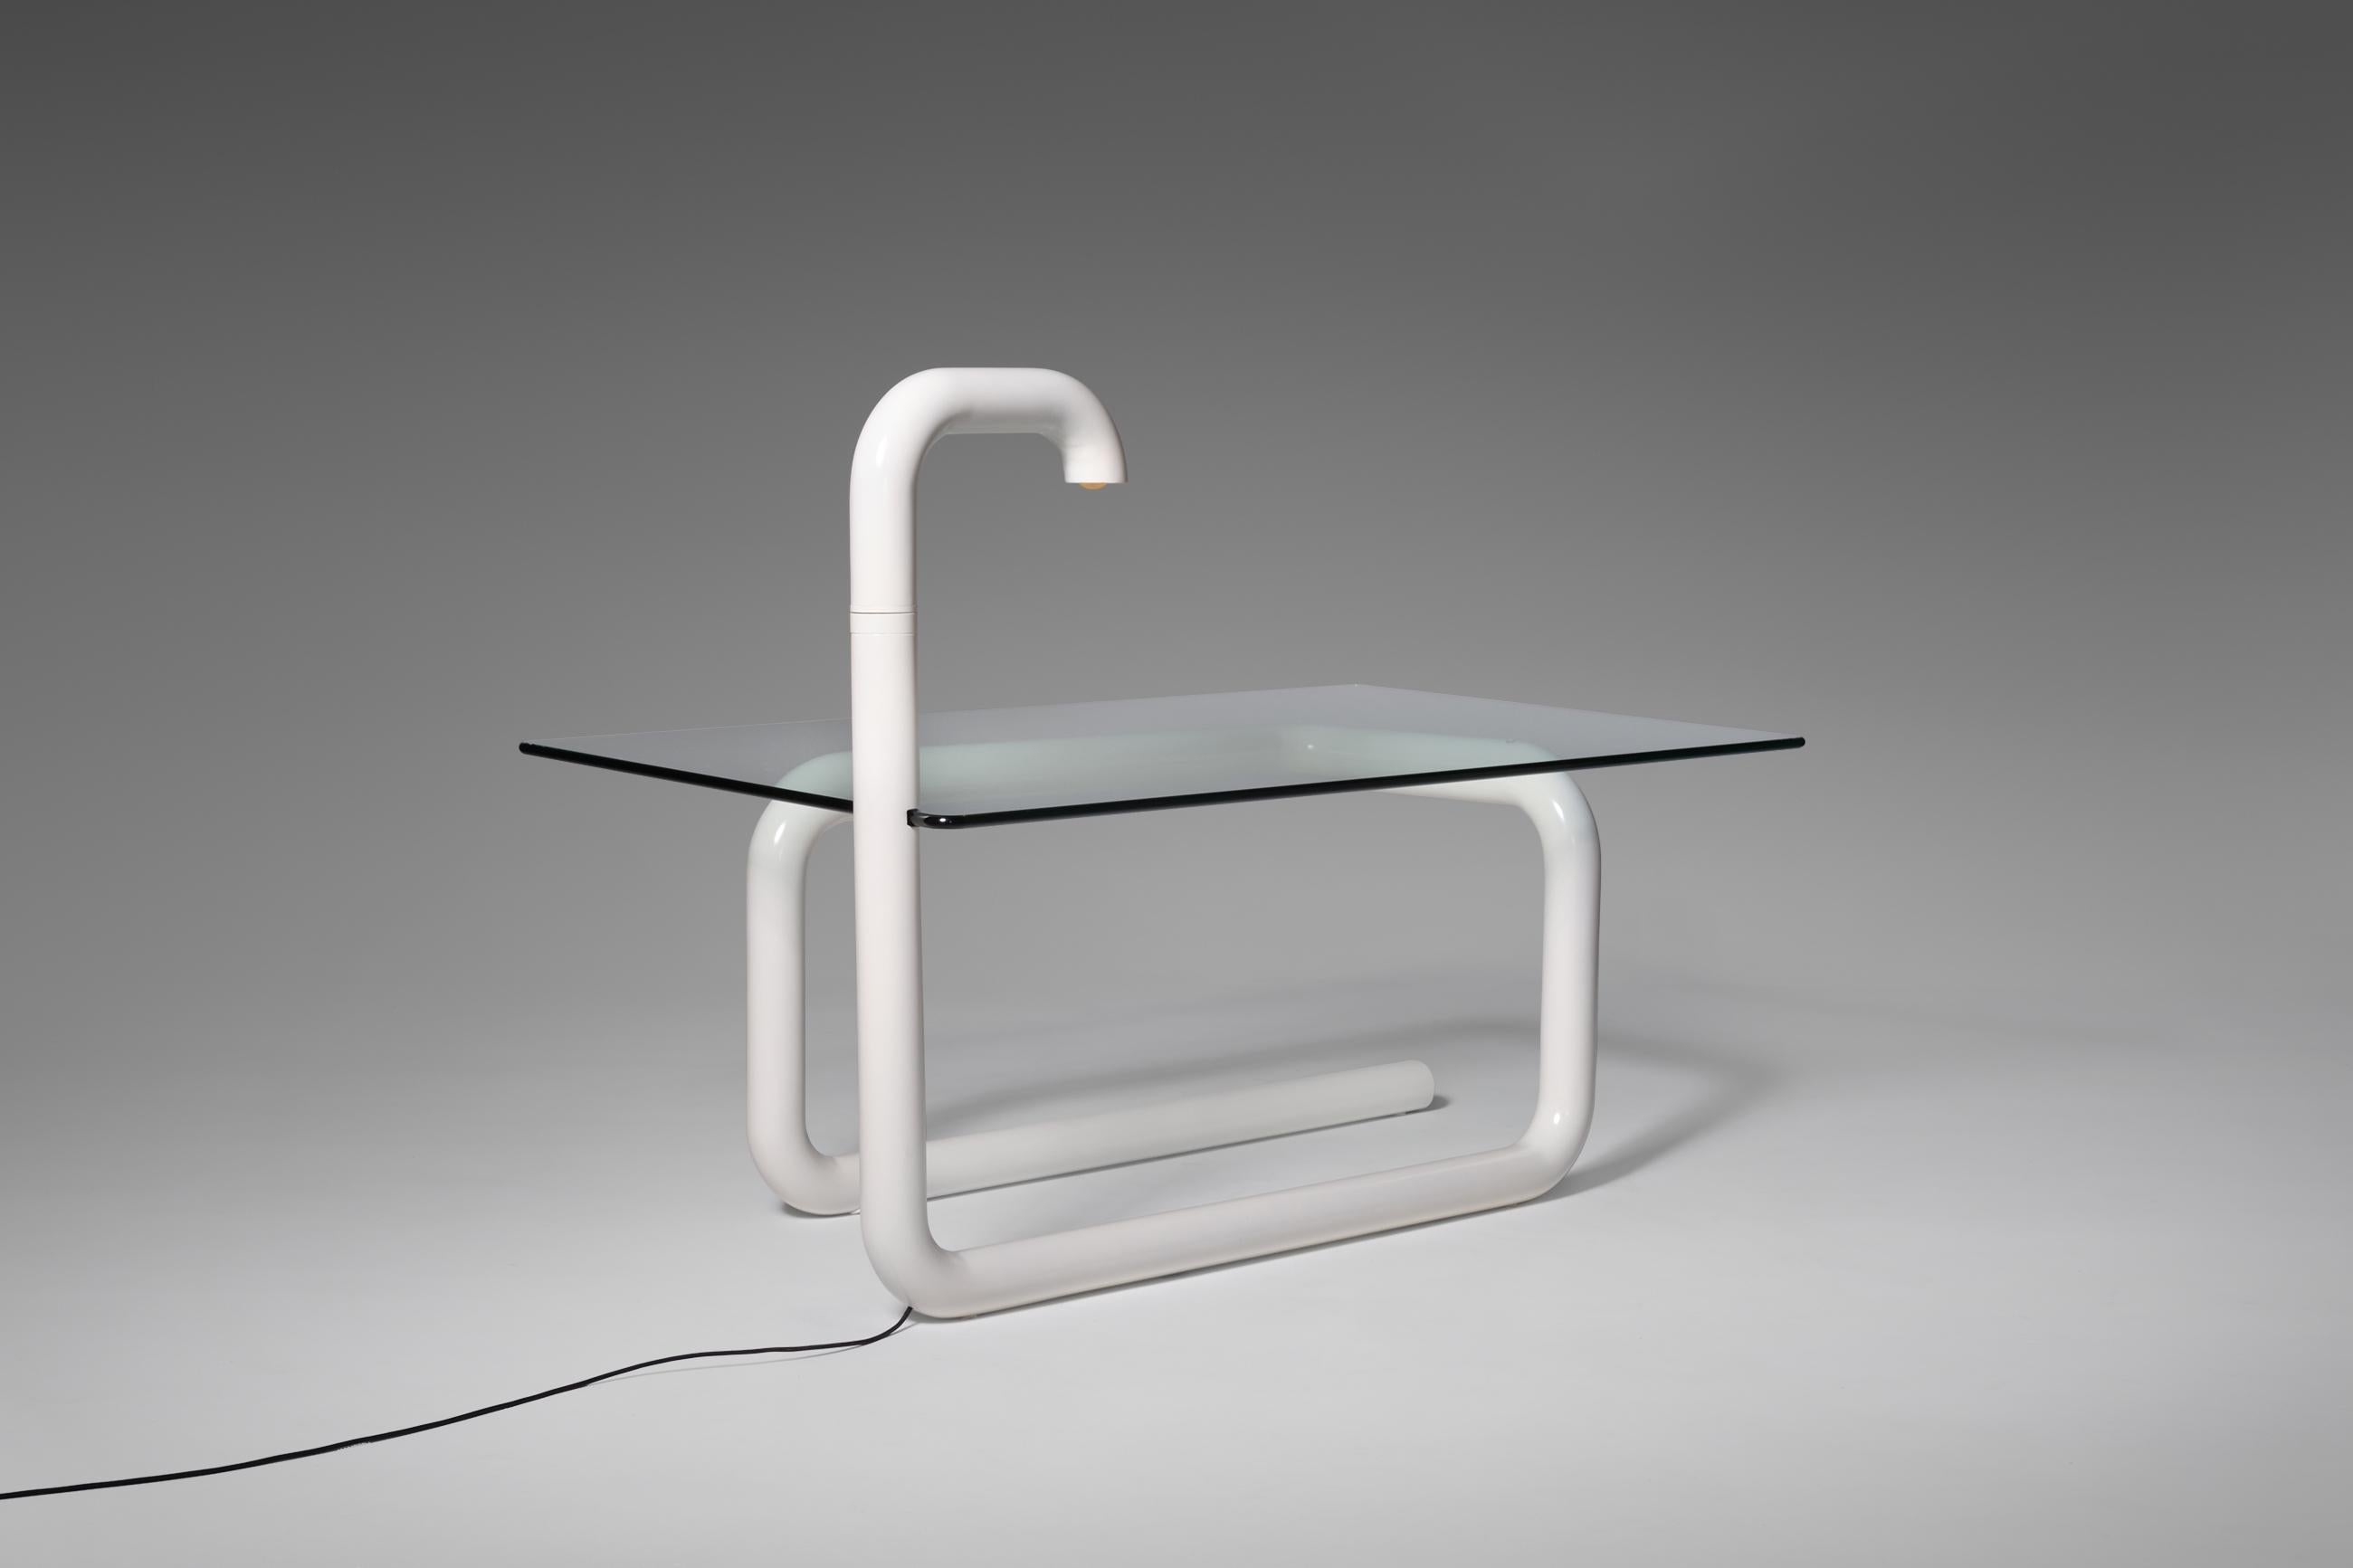 Radical Italian tubular desk, 1960s. The desk is designed in commission for a unique villa on Sicicily, see black and white photo from the original setting. The desk is made from one big continuous metal tube which is finished in an off white